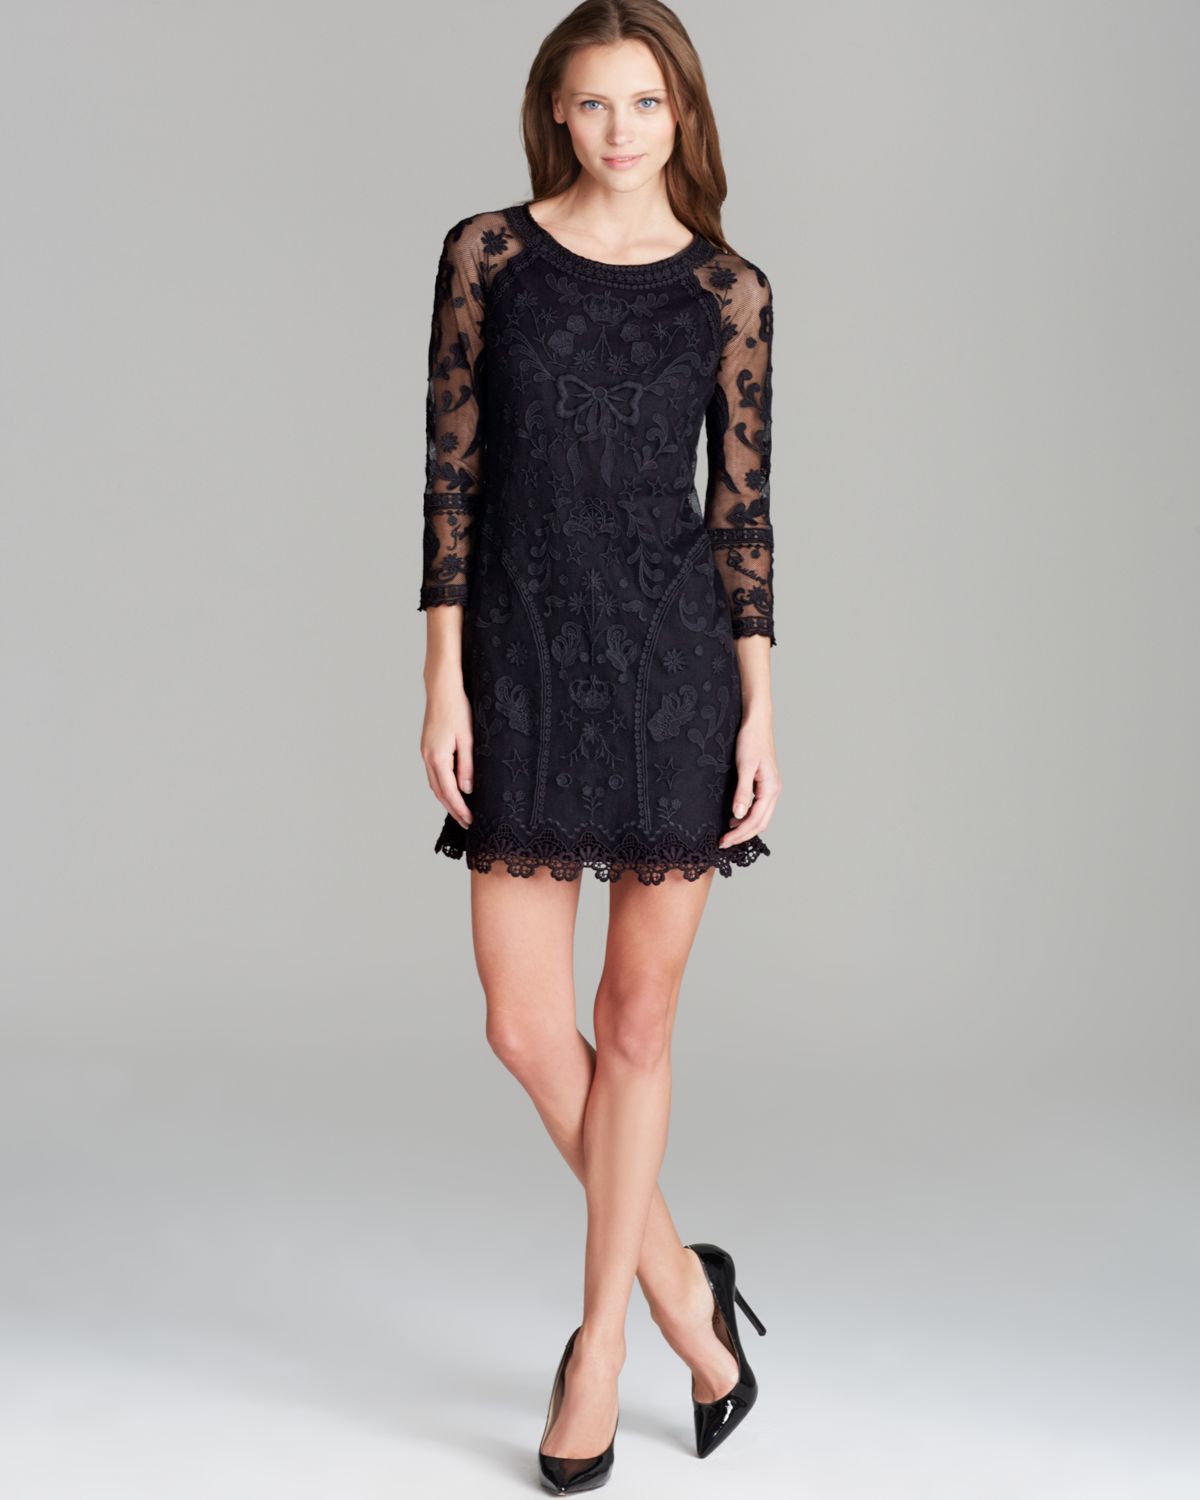 Lyst Juicy Couture Dress Lace In Black 